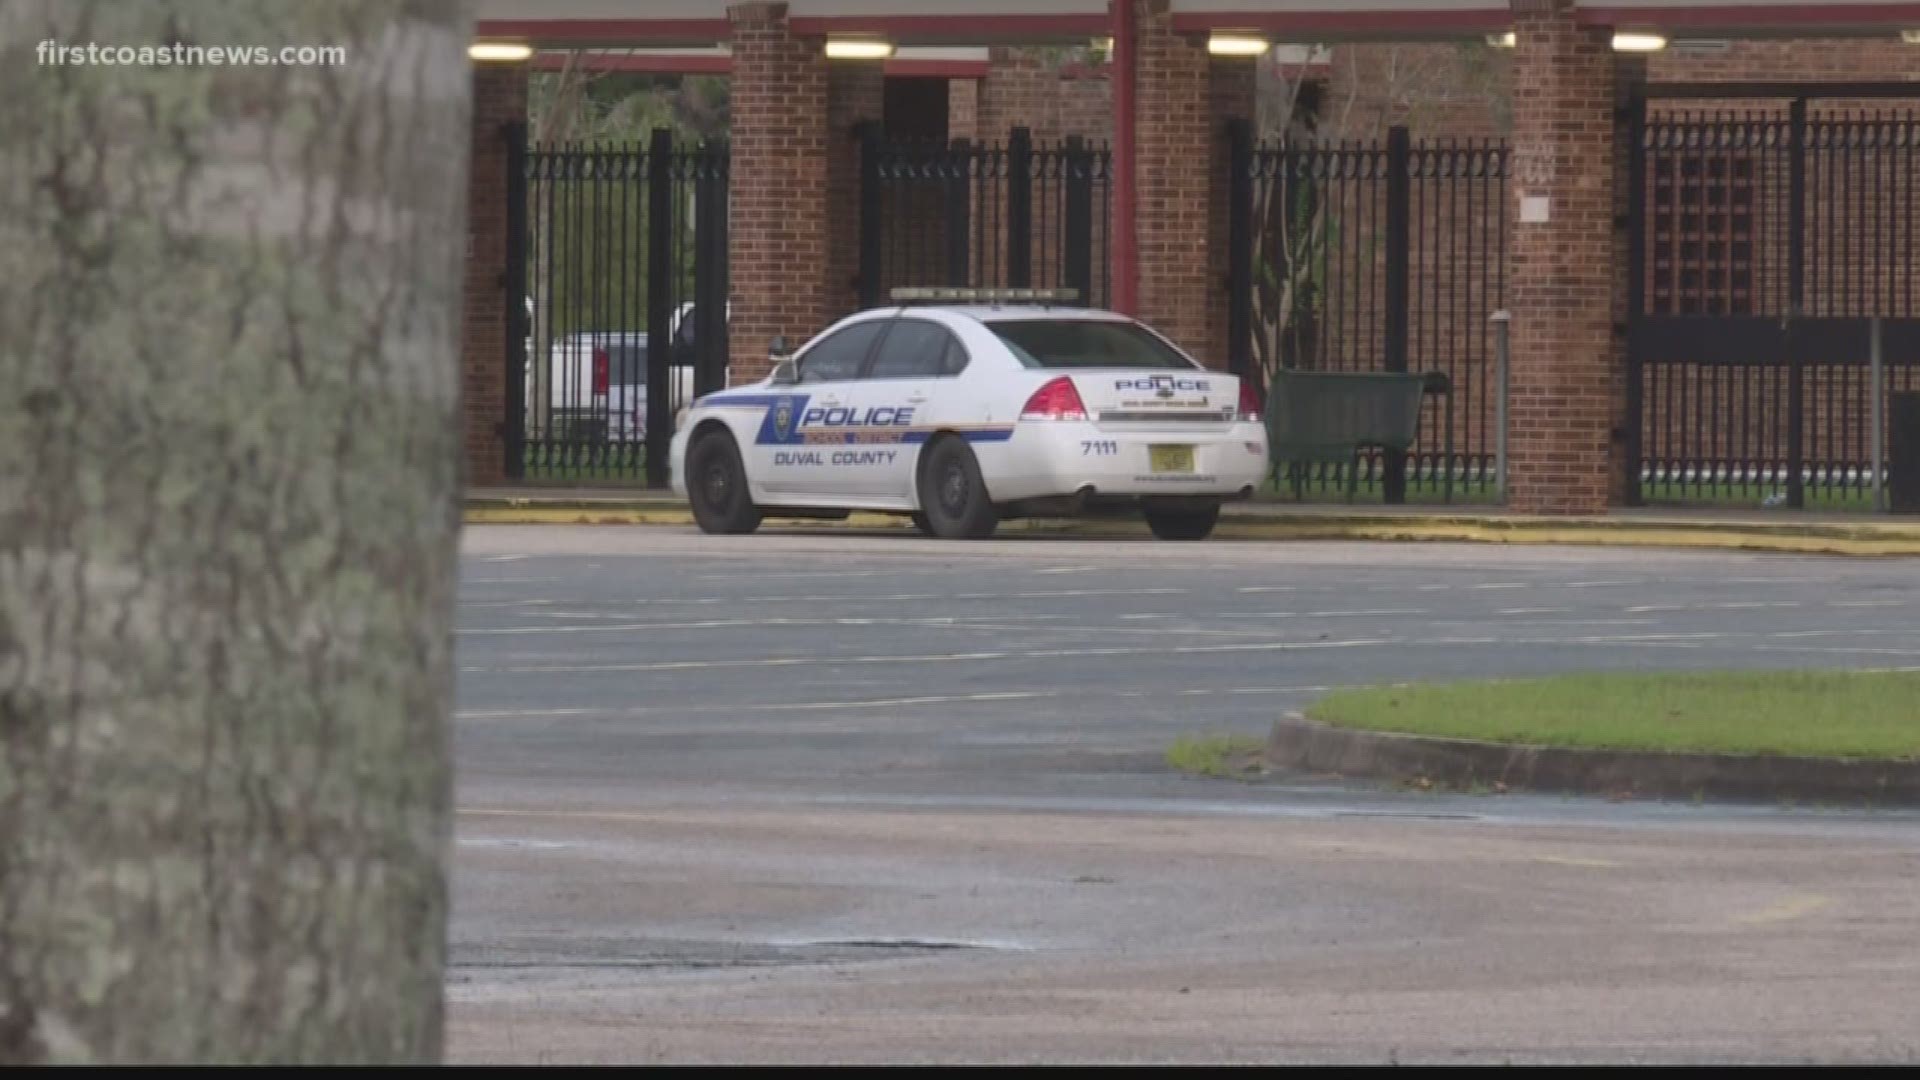 DCPS said parents were notified about the threat. She also said the school is taking additional measures to ensure the safety of the students and staff.